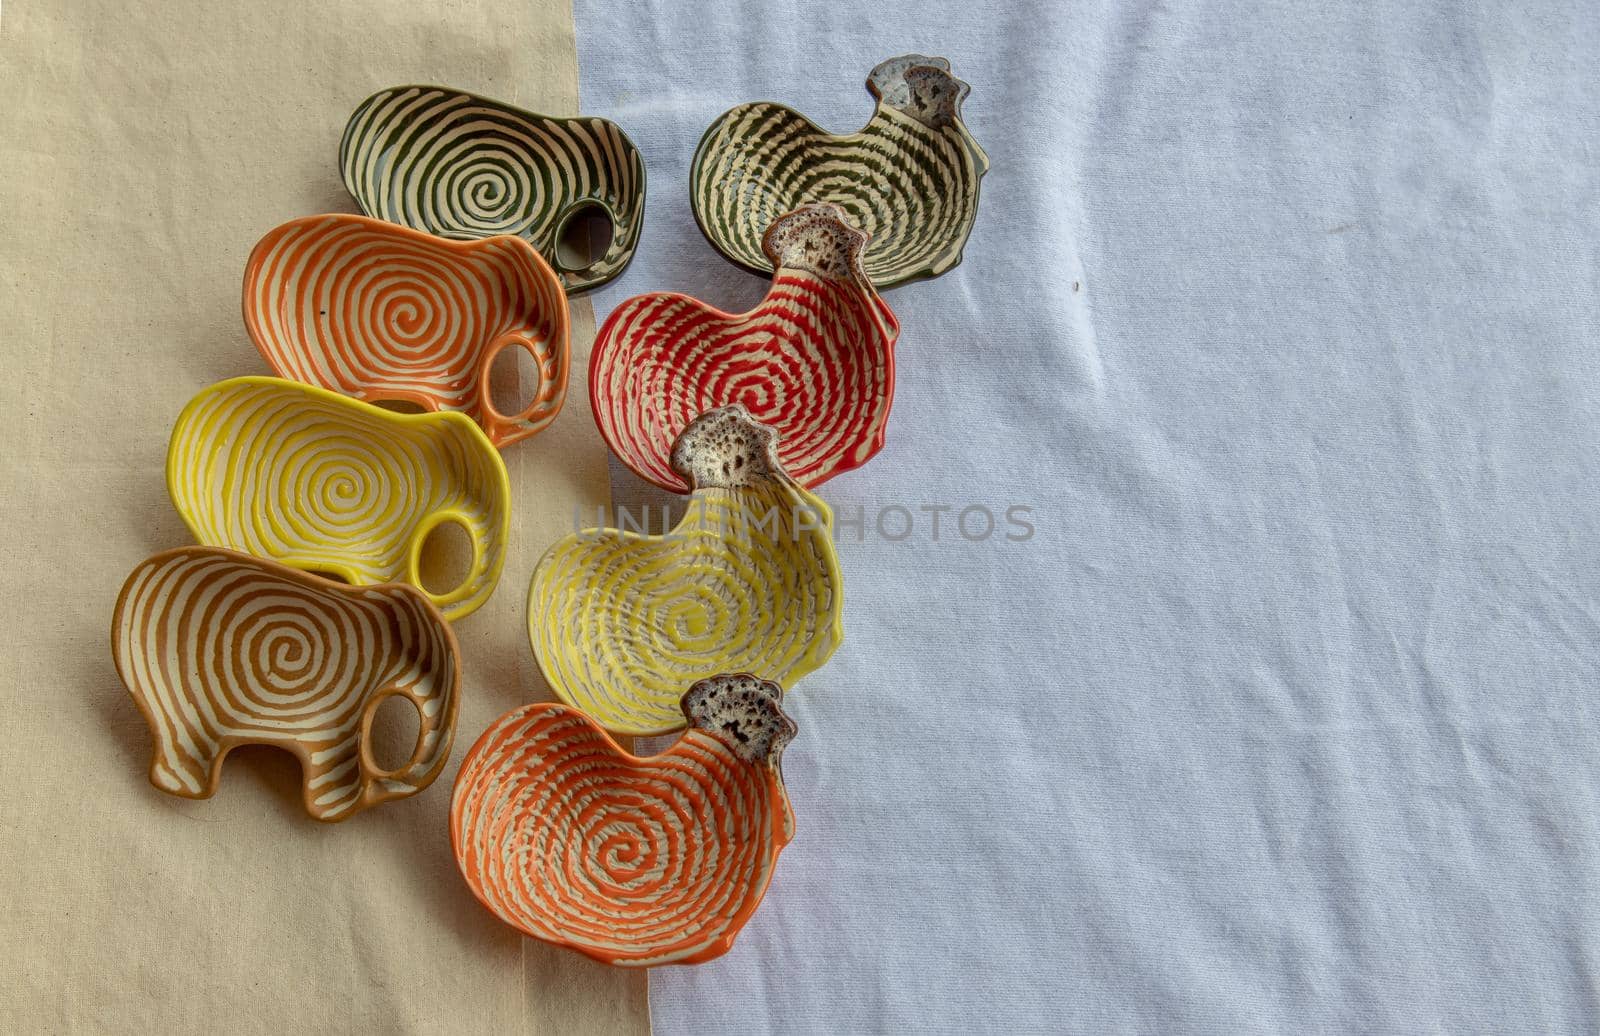 Set of Chickens and Elephants shaped ceramics cup to Decorate the house beautifully. Cup for dipping sauce, Copy space, Selective focus.